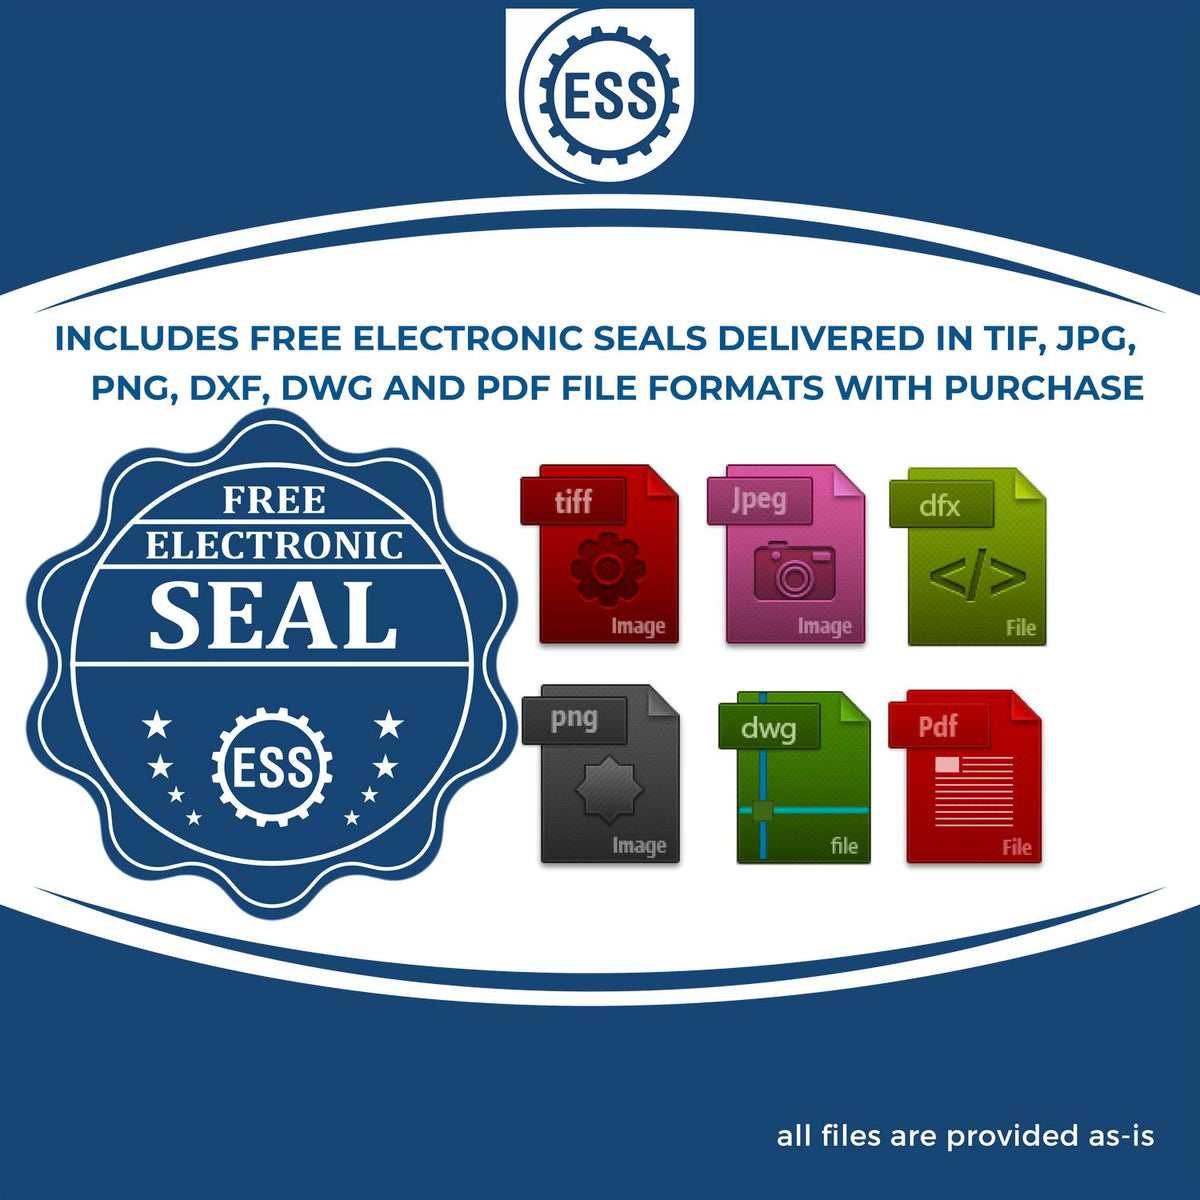 An infographic for the free electronic seal for the Slim Pre-Inked State Seal Notary Stamp for New Jersey illustrating the different file type icons such as DXF, DWG, TIF, JPG and PNG.